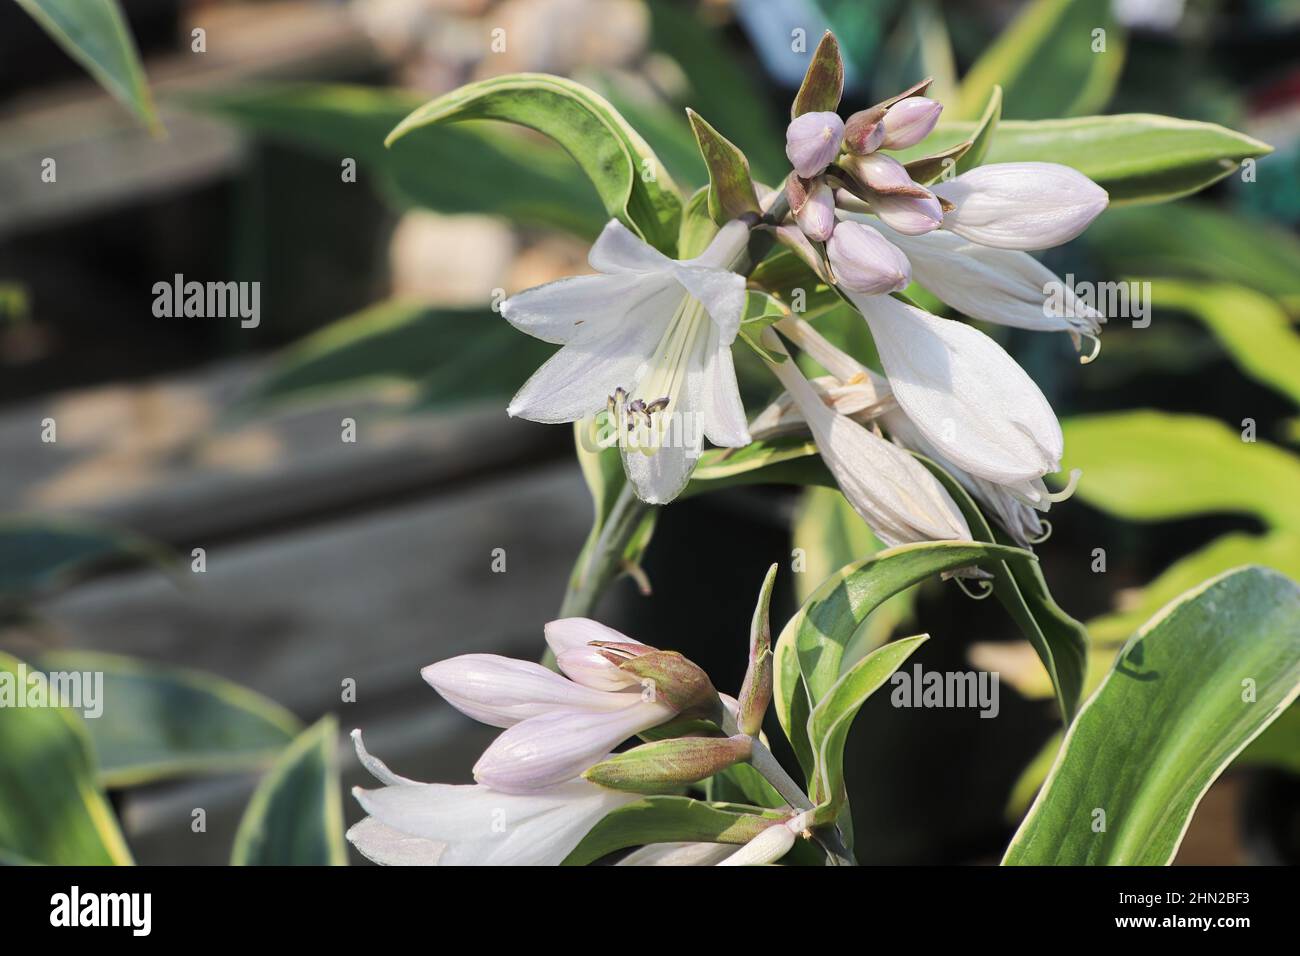 Delicate pink blossoms on a hosta plant Stock Photo